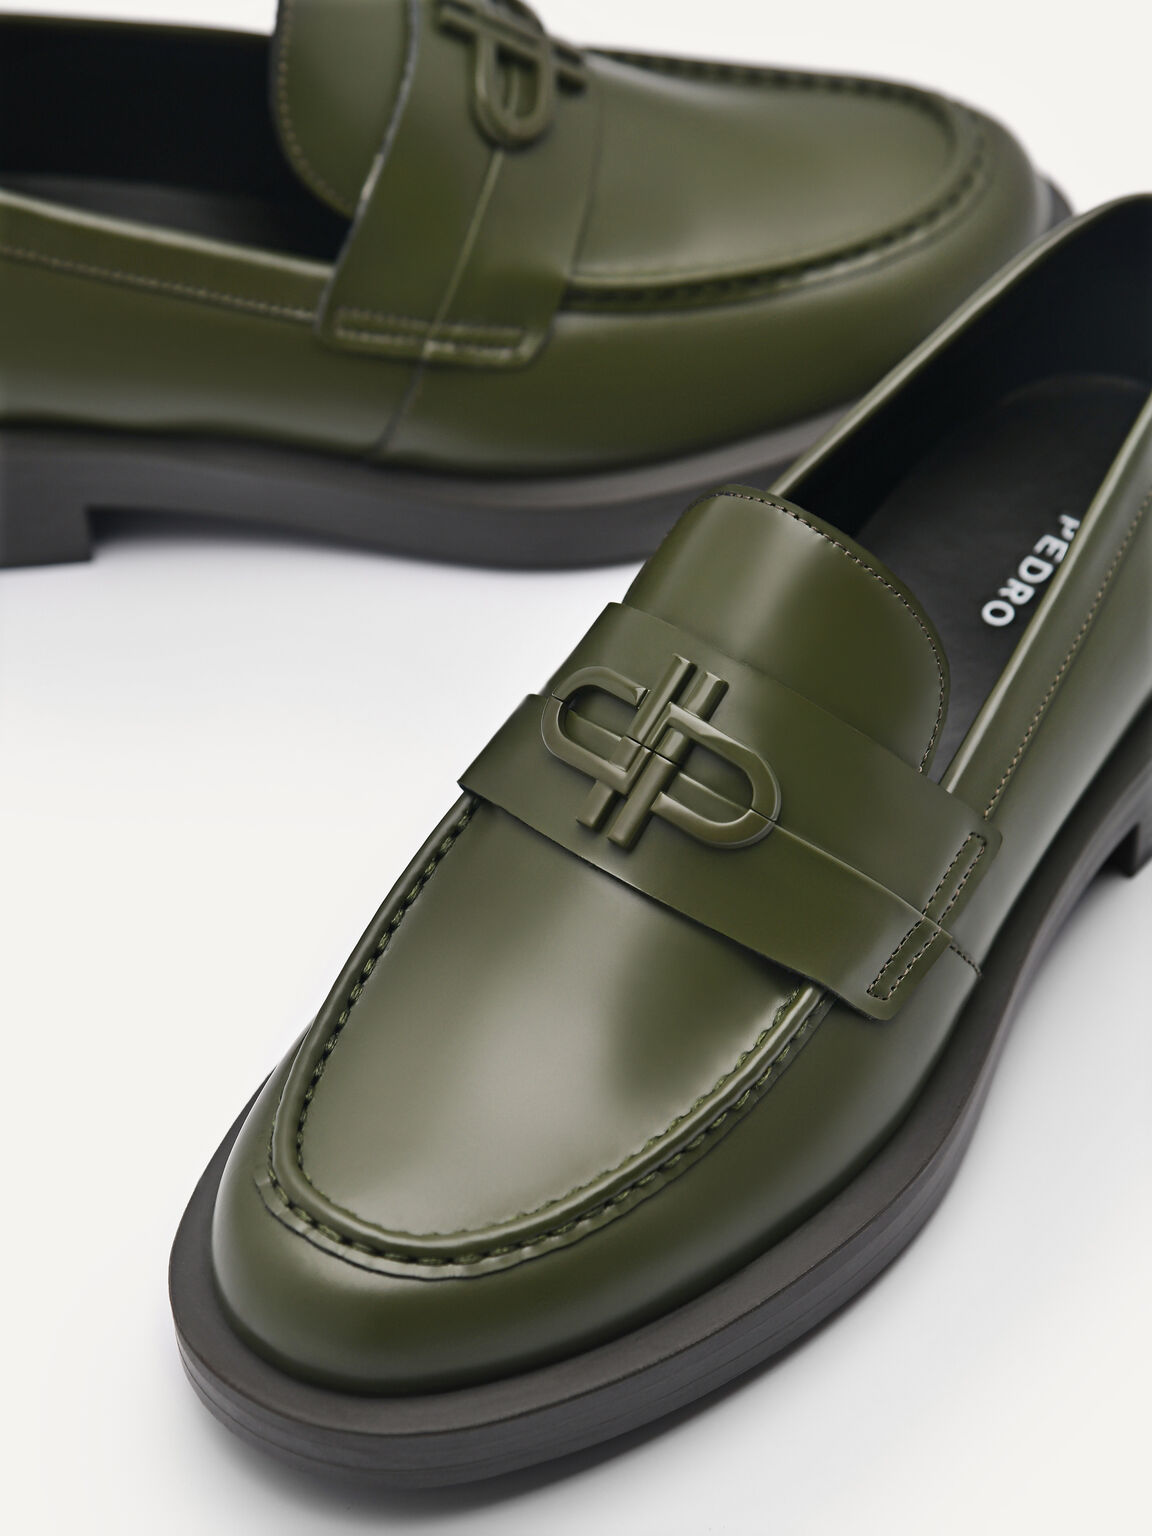 PEDRO Icon Leather Loafers, Military Green